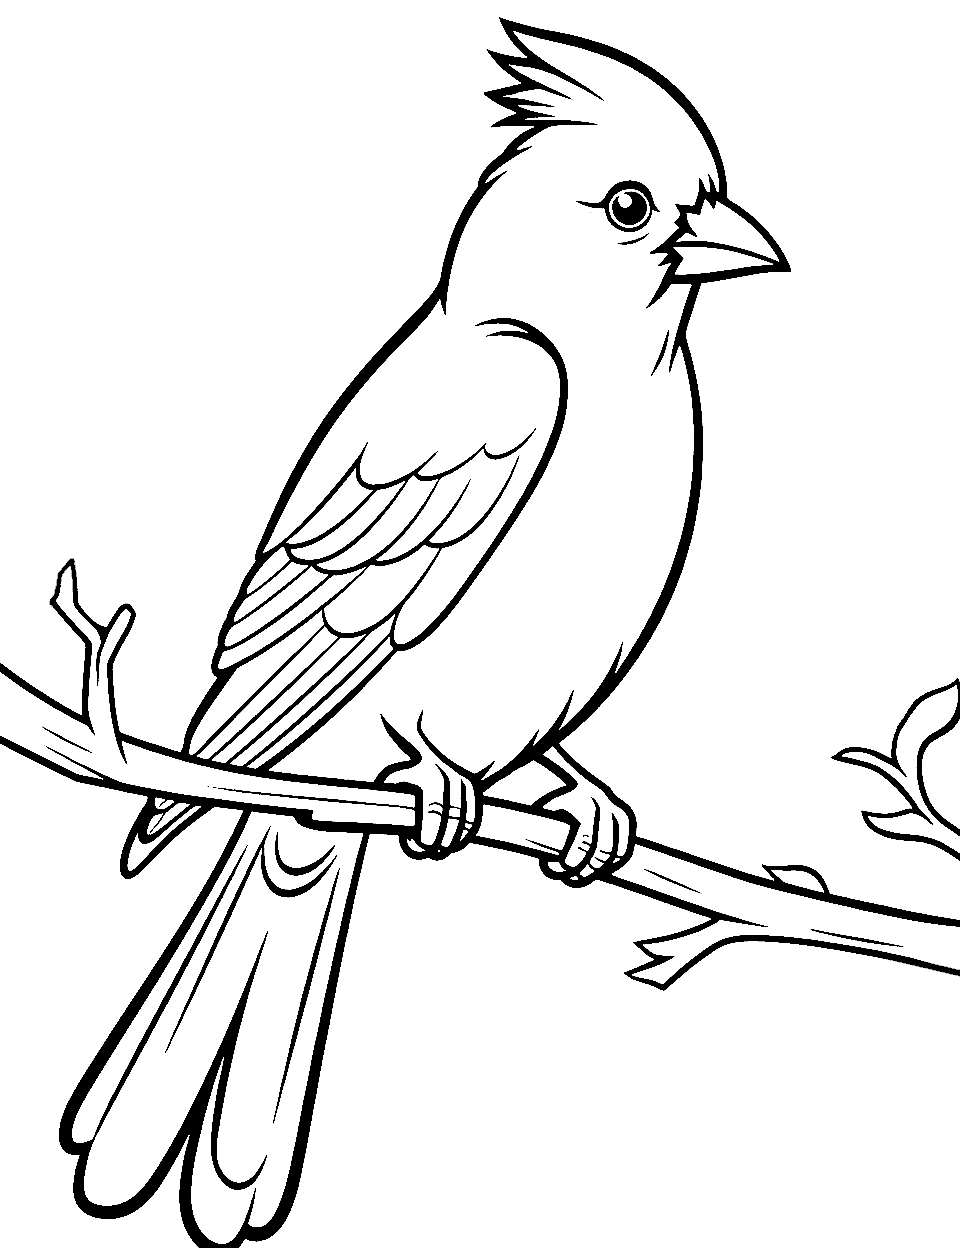 Cardinal on a Branch Coloring Page - A bright red cardinal contrasting on a branch.